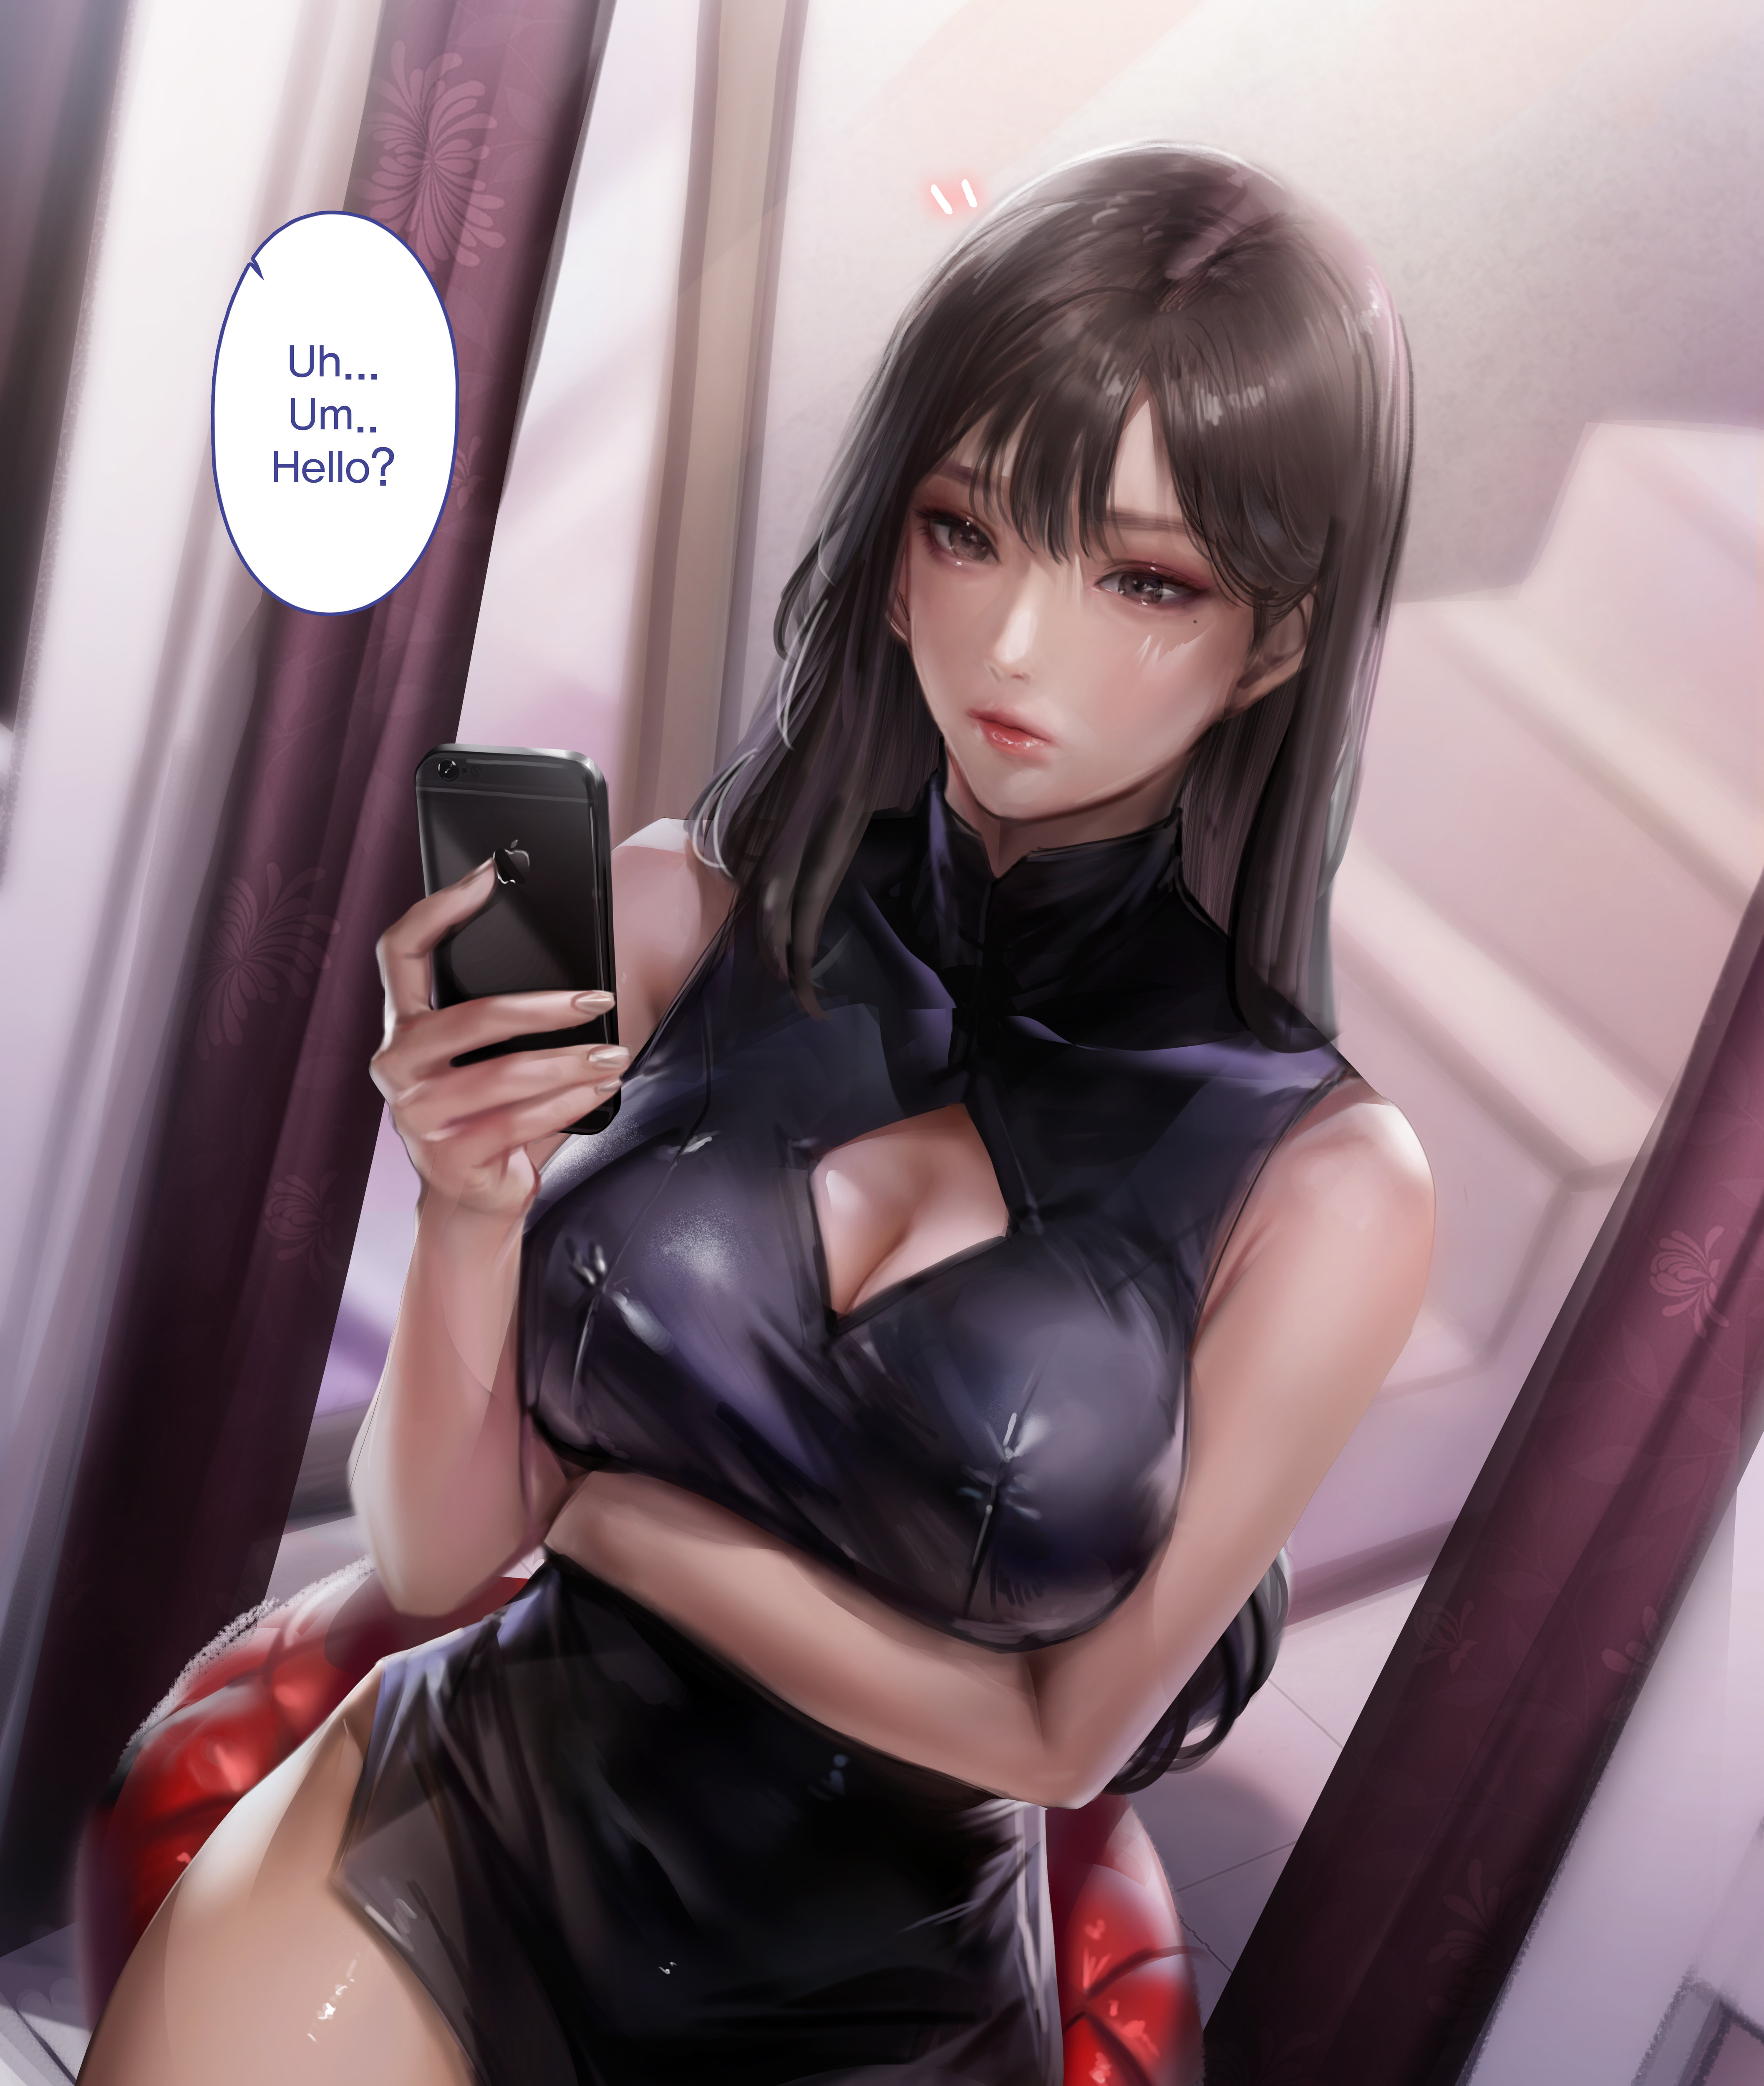 Hentai Comics - Busty asian girl friend is now a cheaper hooker who does  anal - 186 Pics | Hentai City